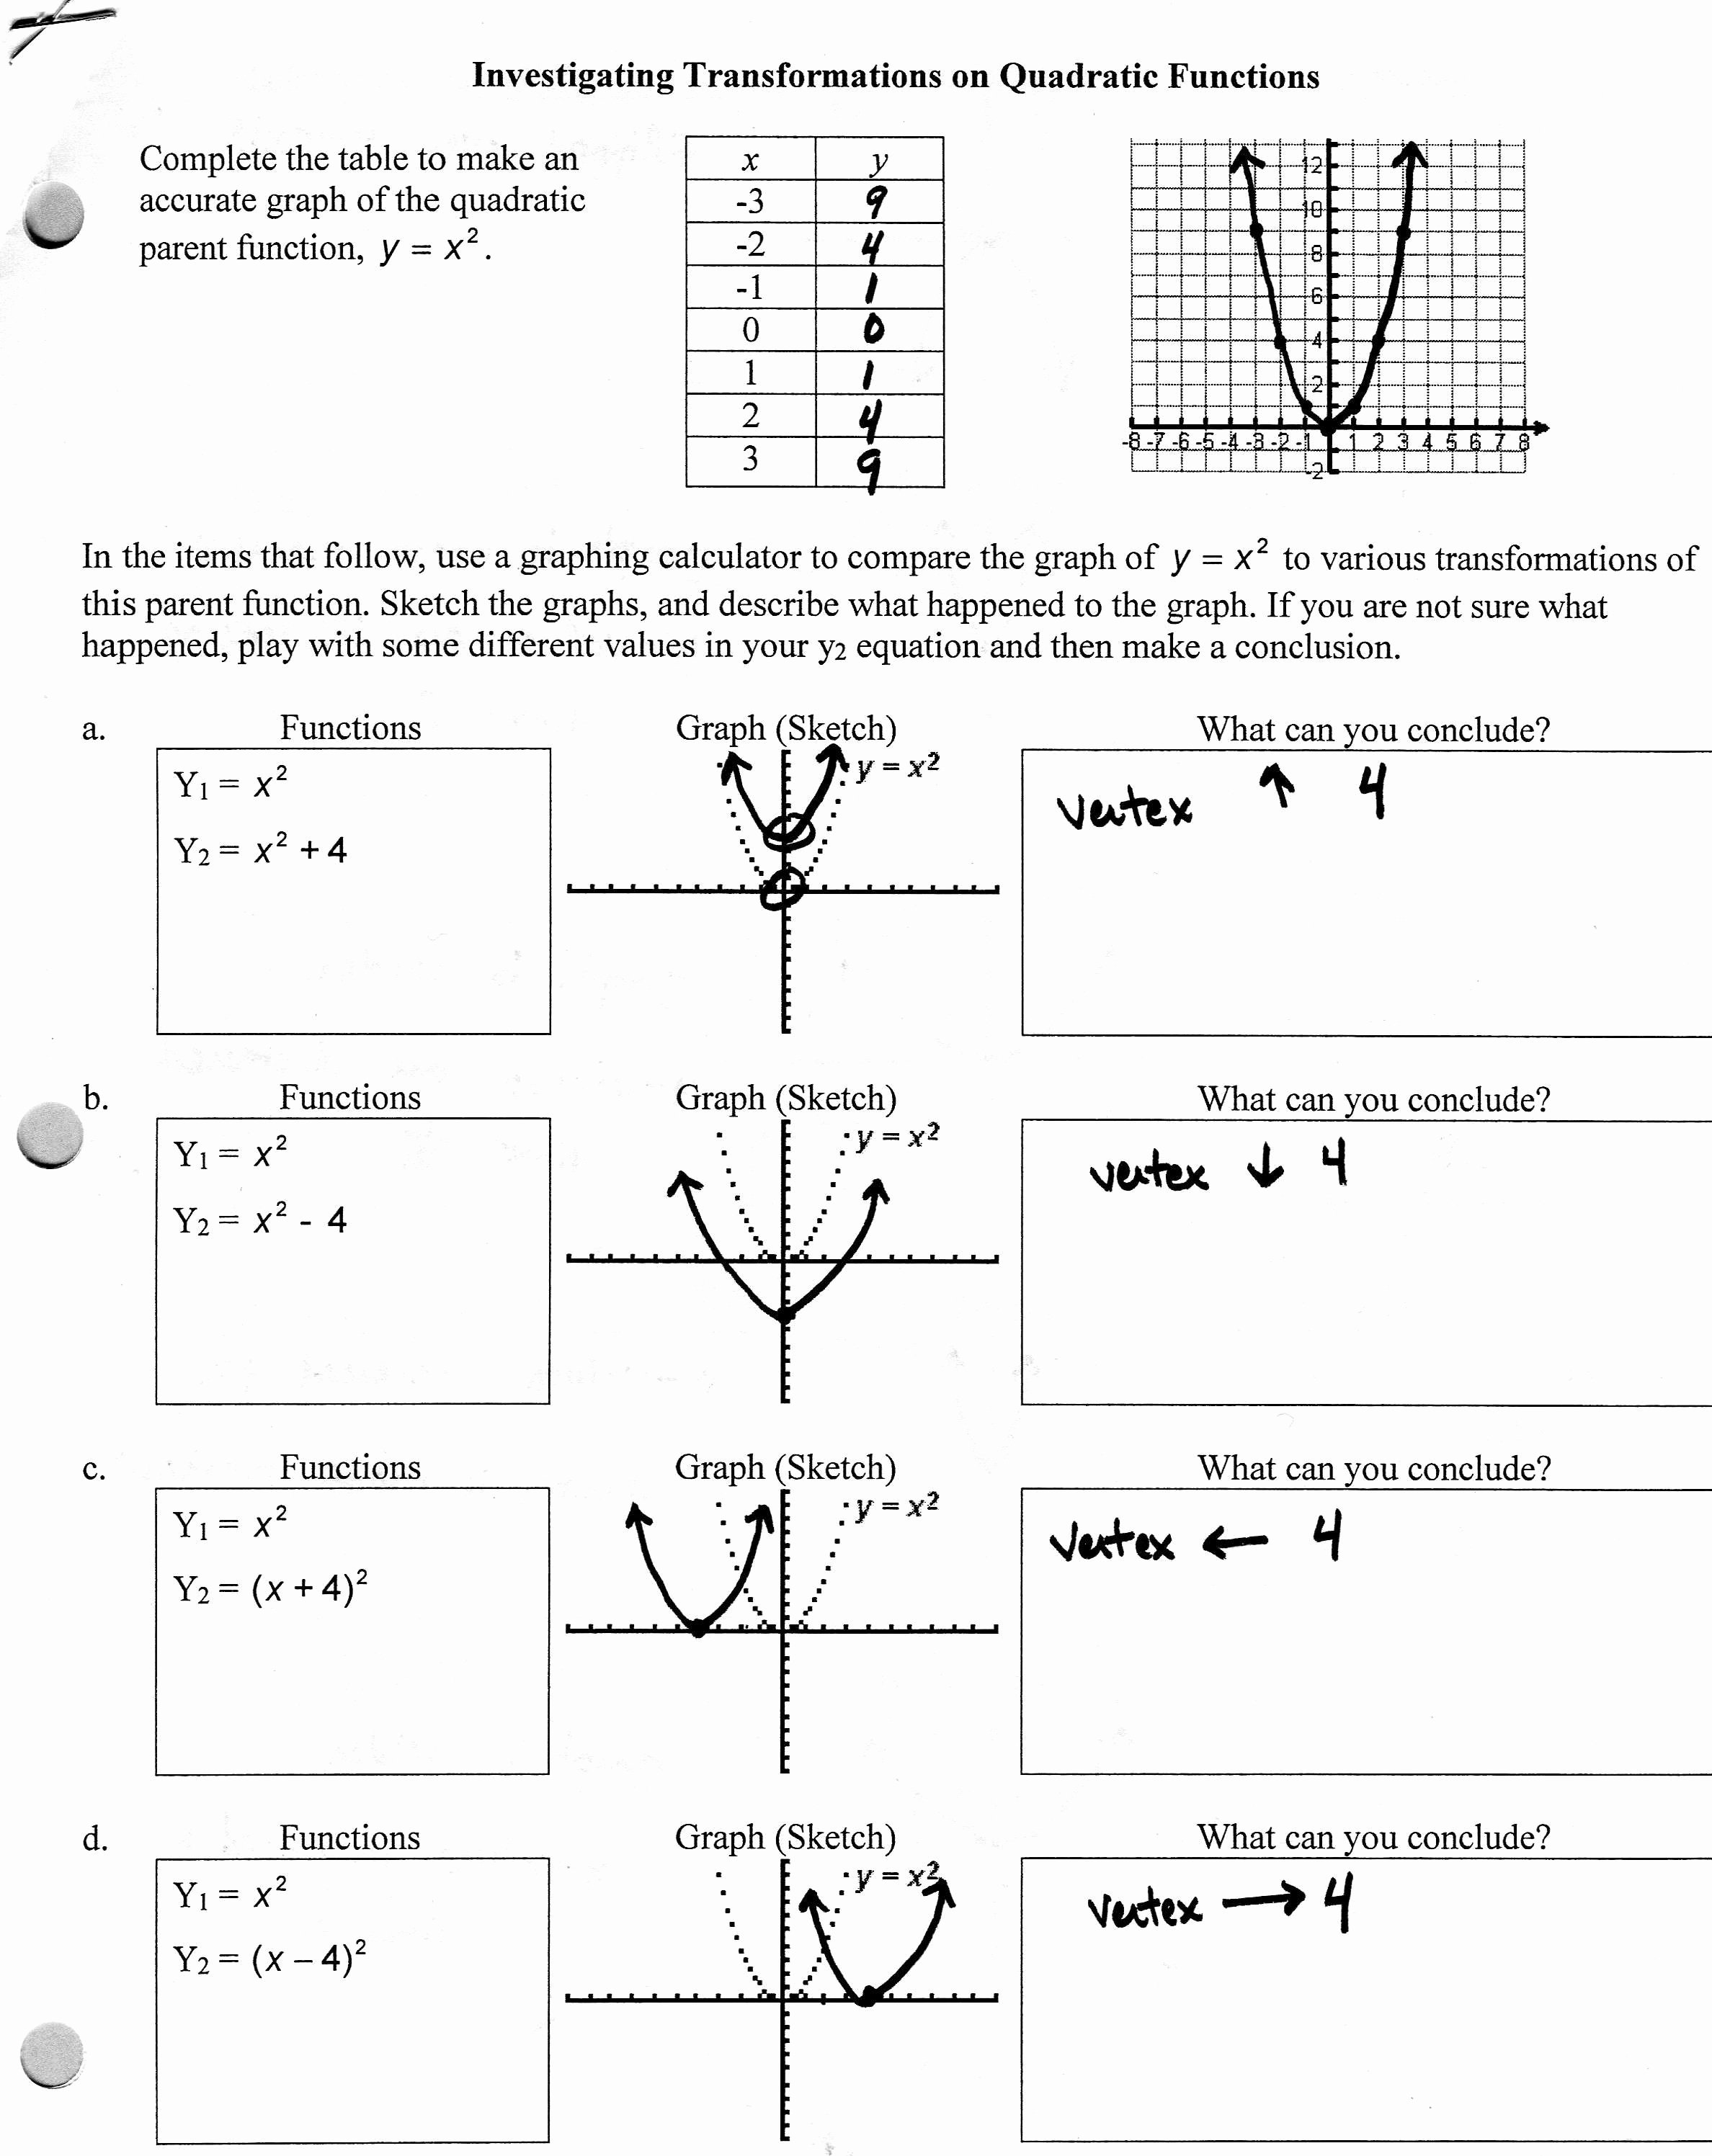 Graphing Quadratic Functions Worksheet Answers Awesome Graphing Quadratic Functions Worksheet Answer Key